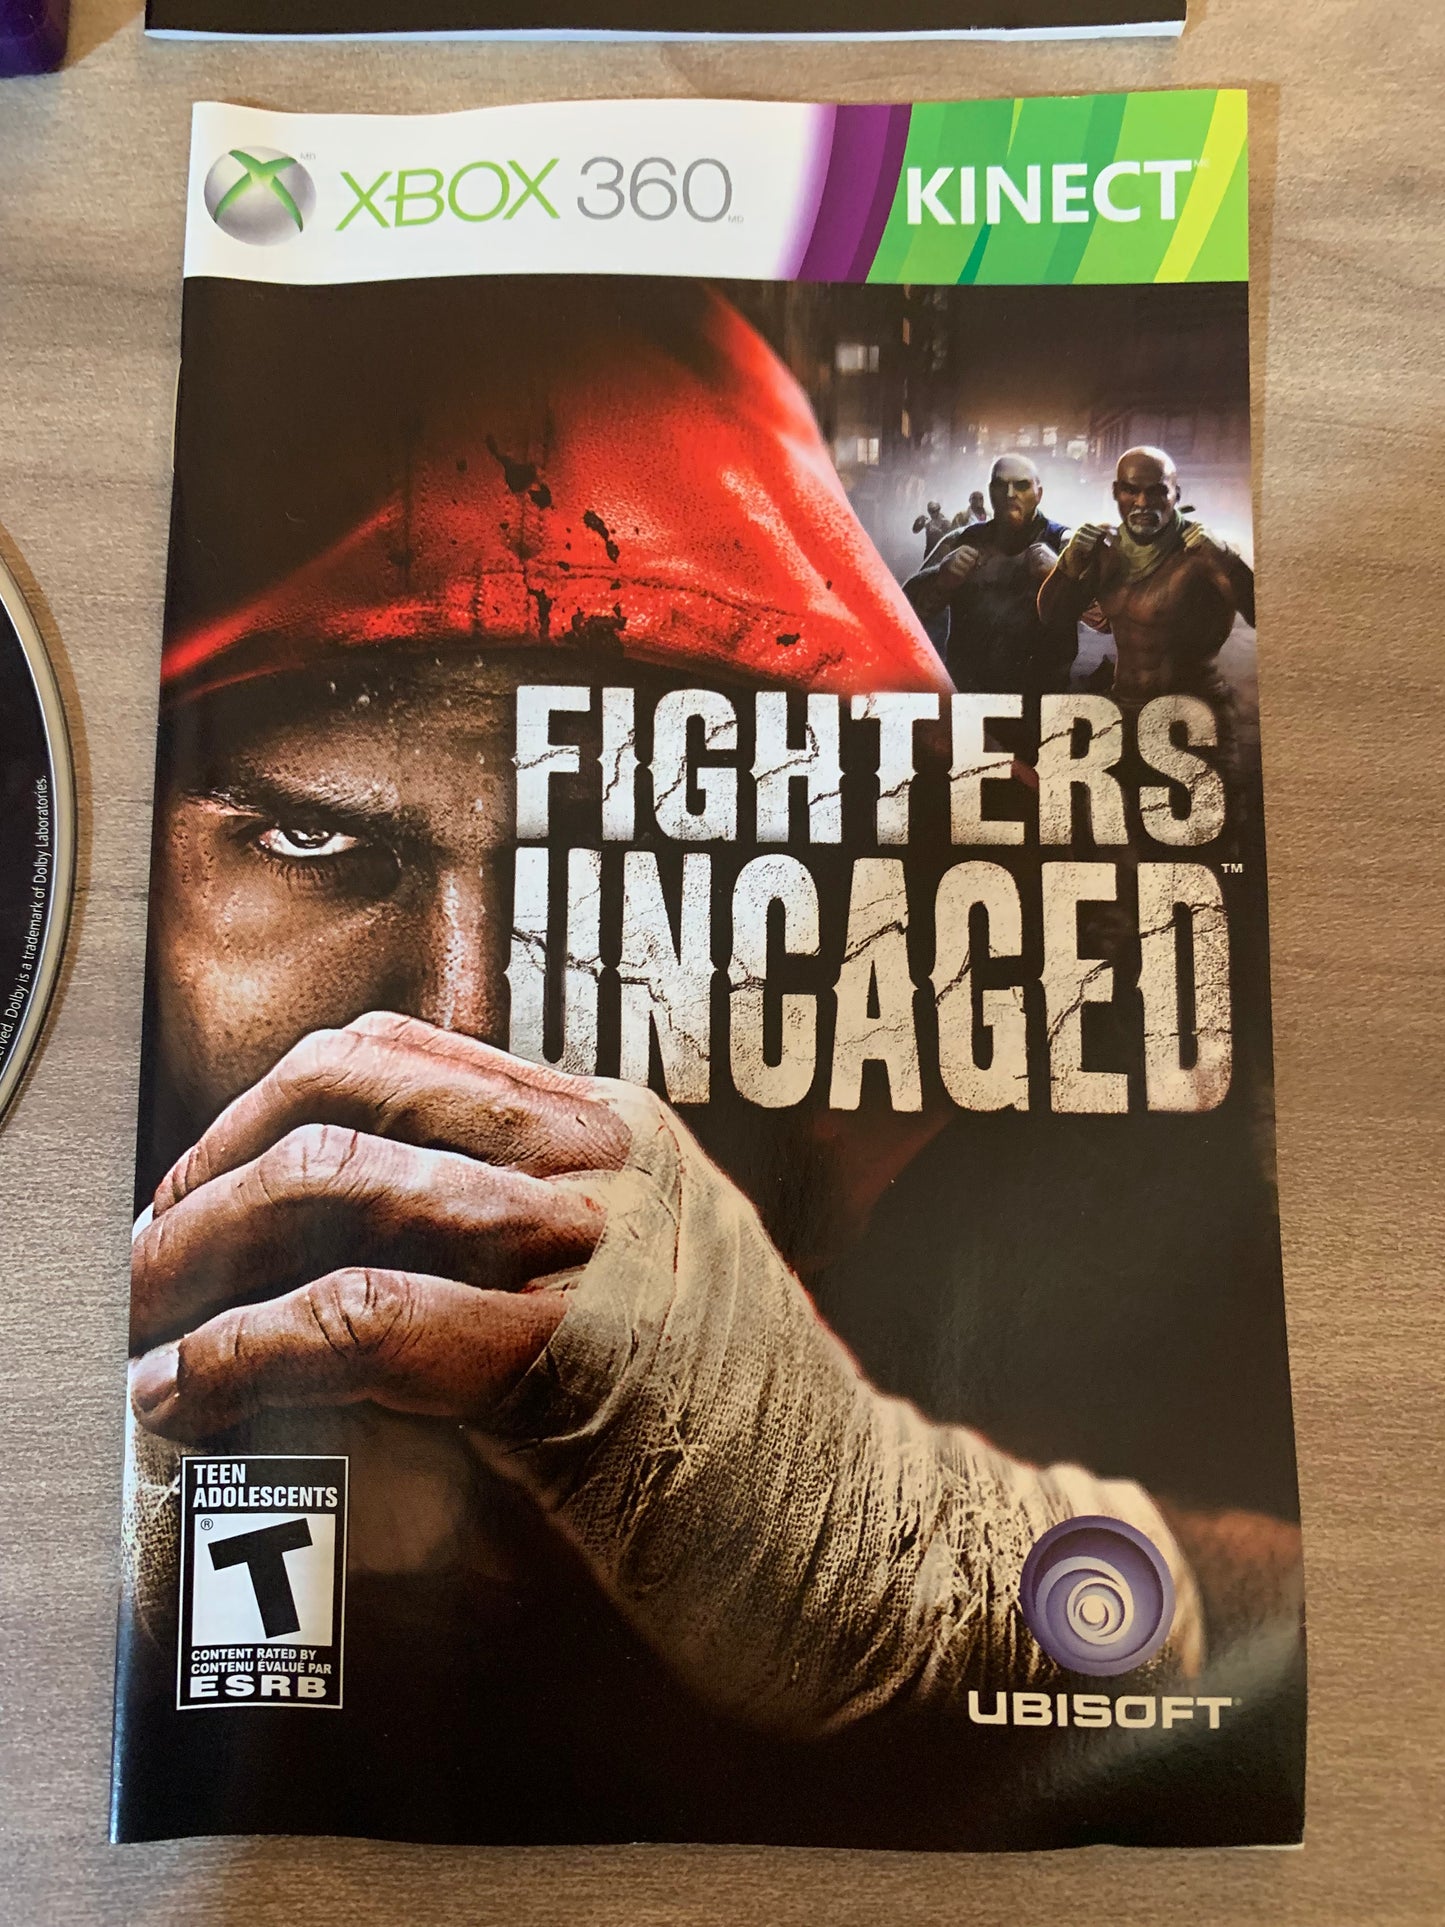 Microsoft XBOX 360 | UNCAGED FIGHTERS